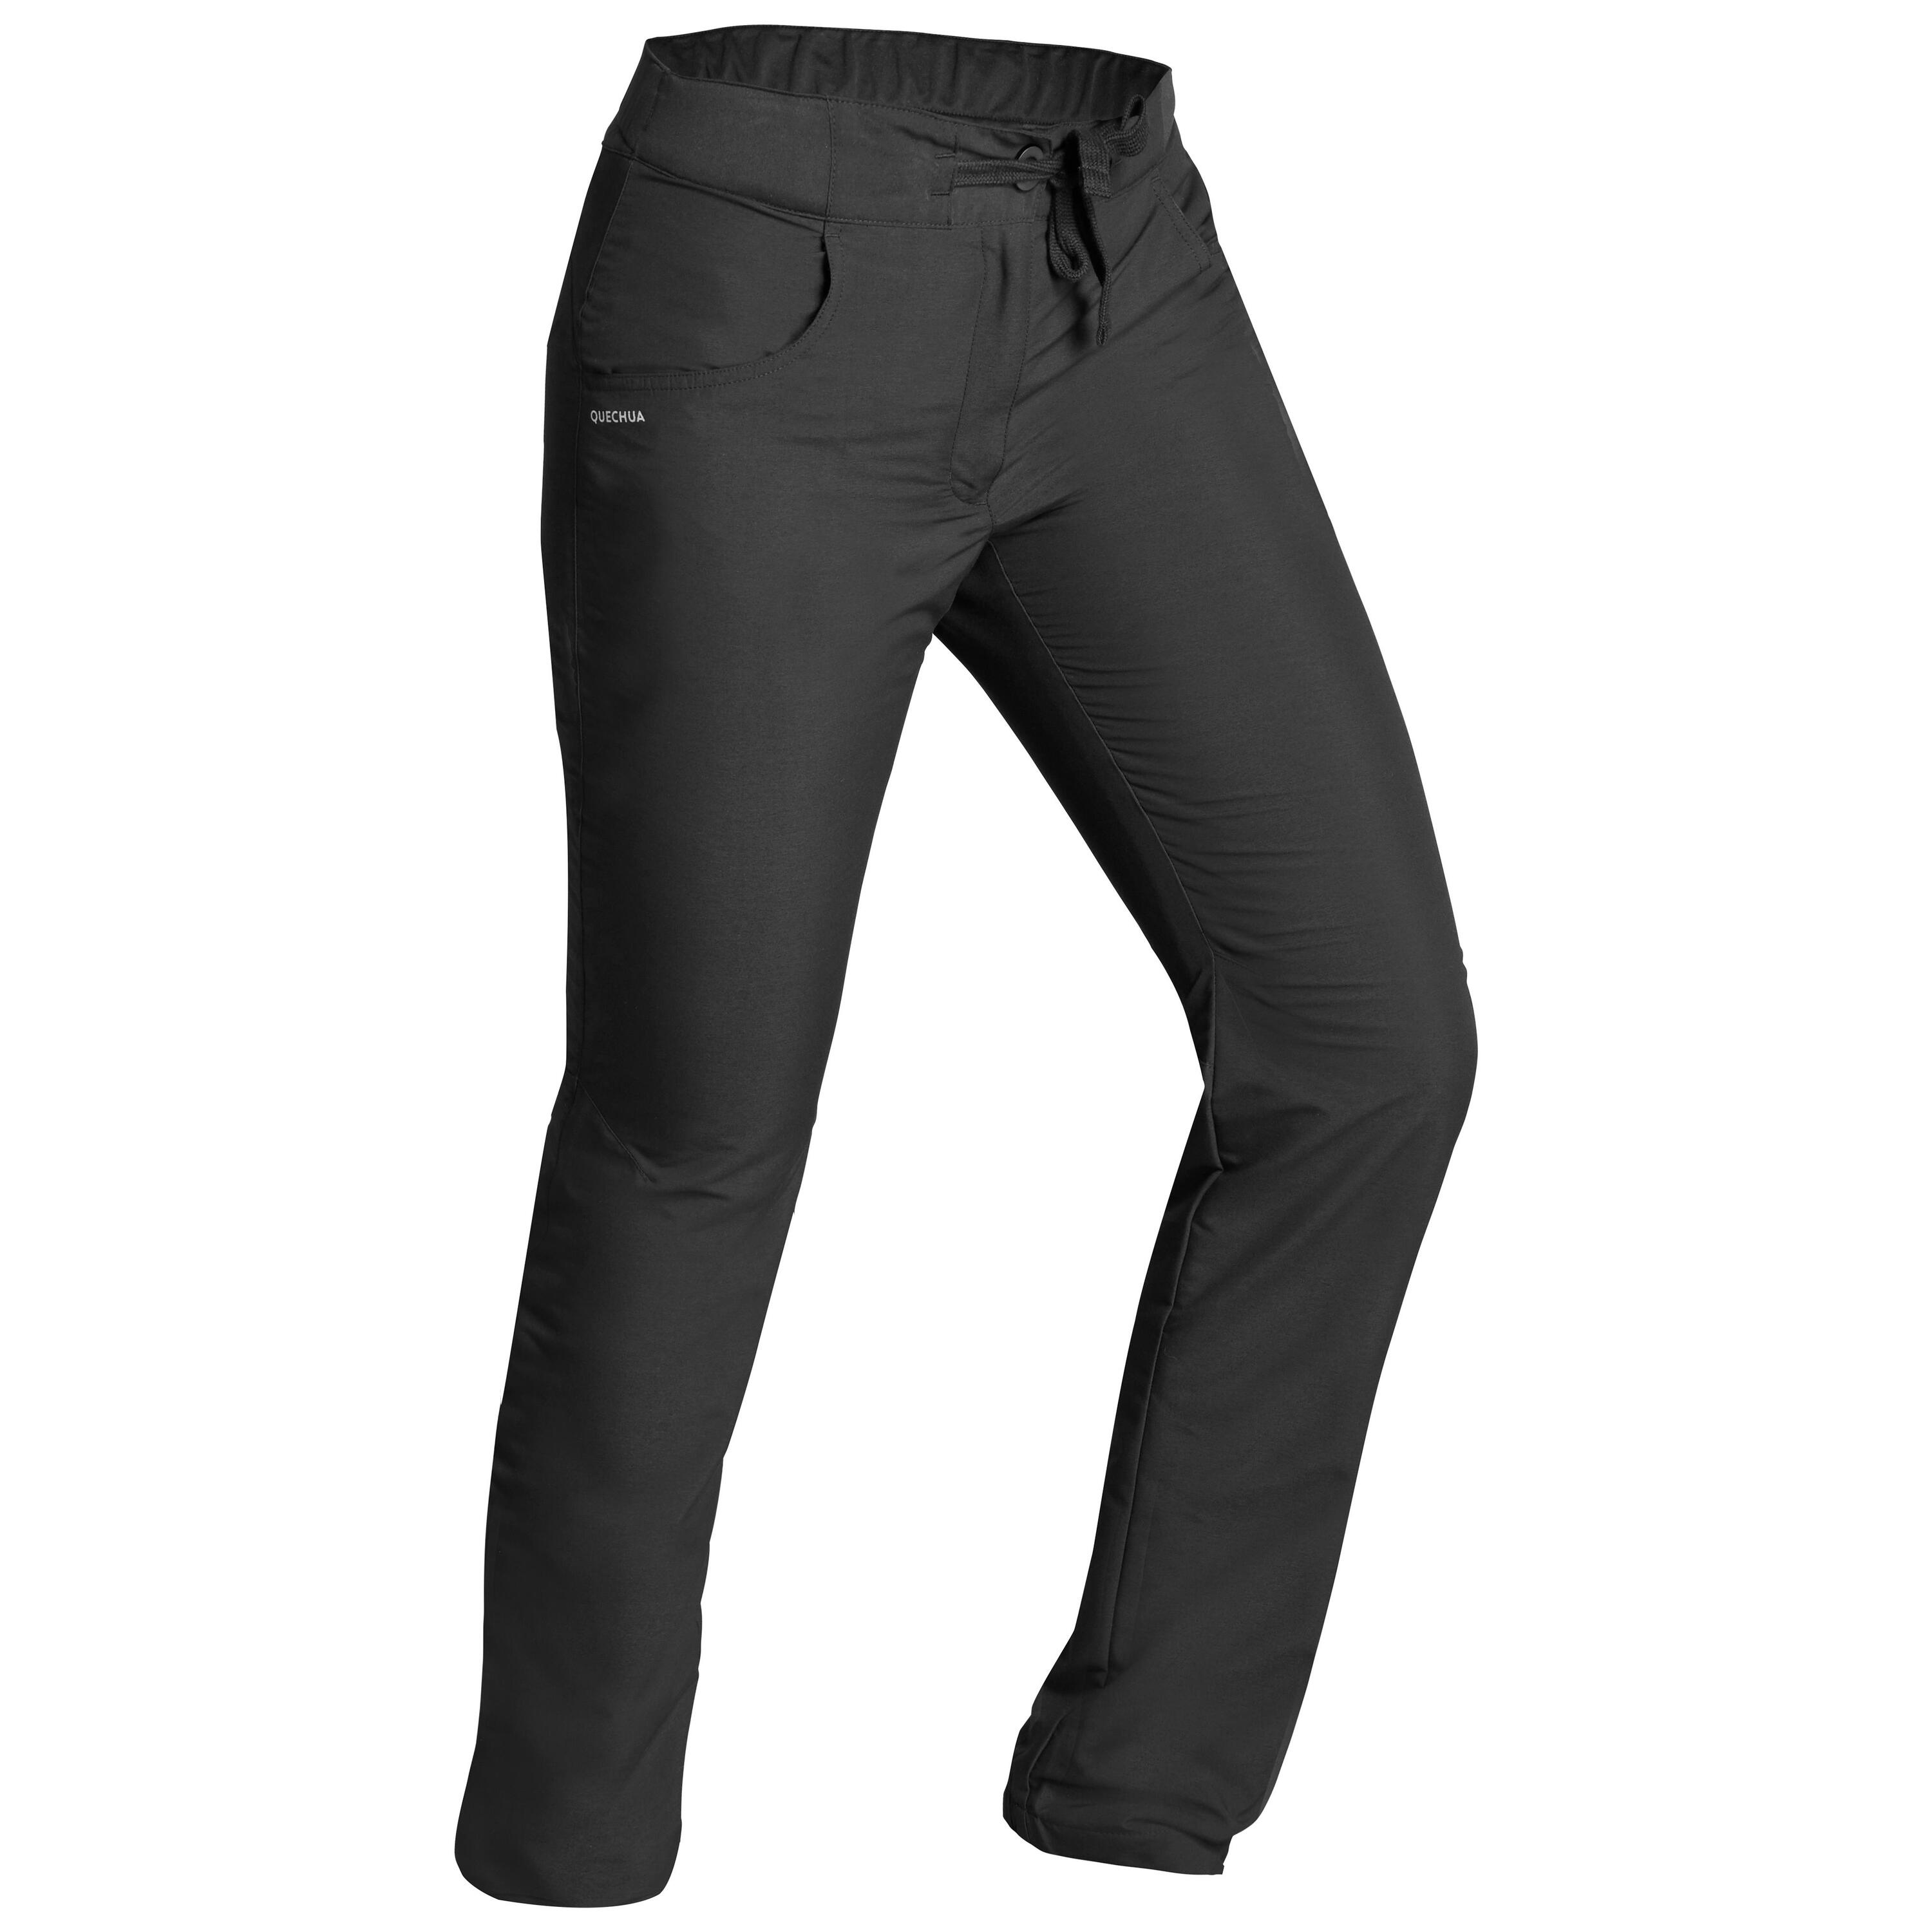 WOMEN'S HIKING WARM WATER-REPELLENT TROUSERS - SH100   4/10